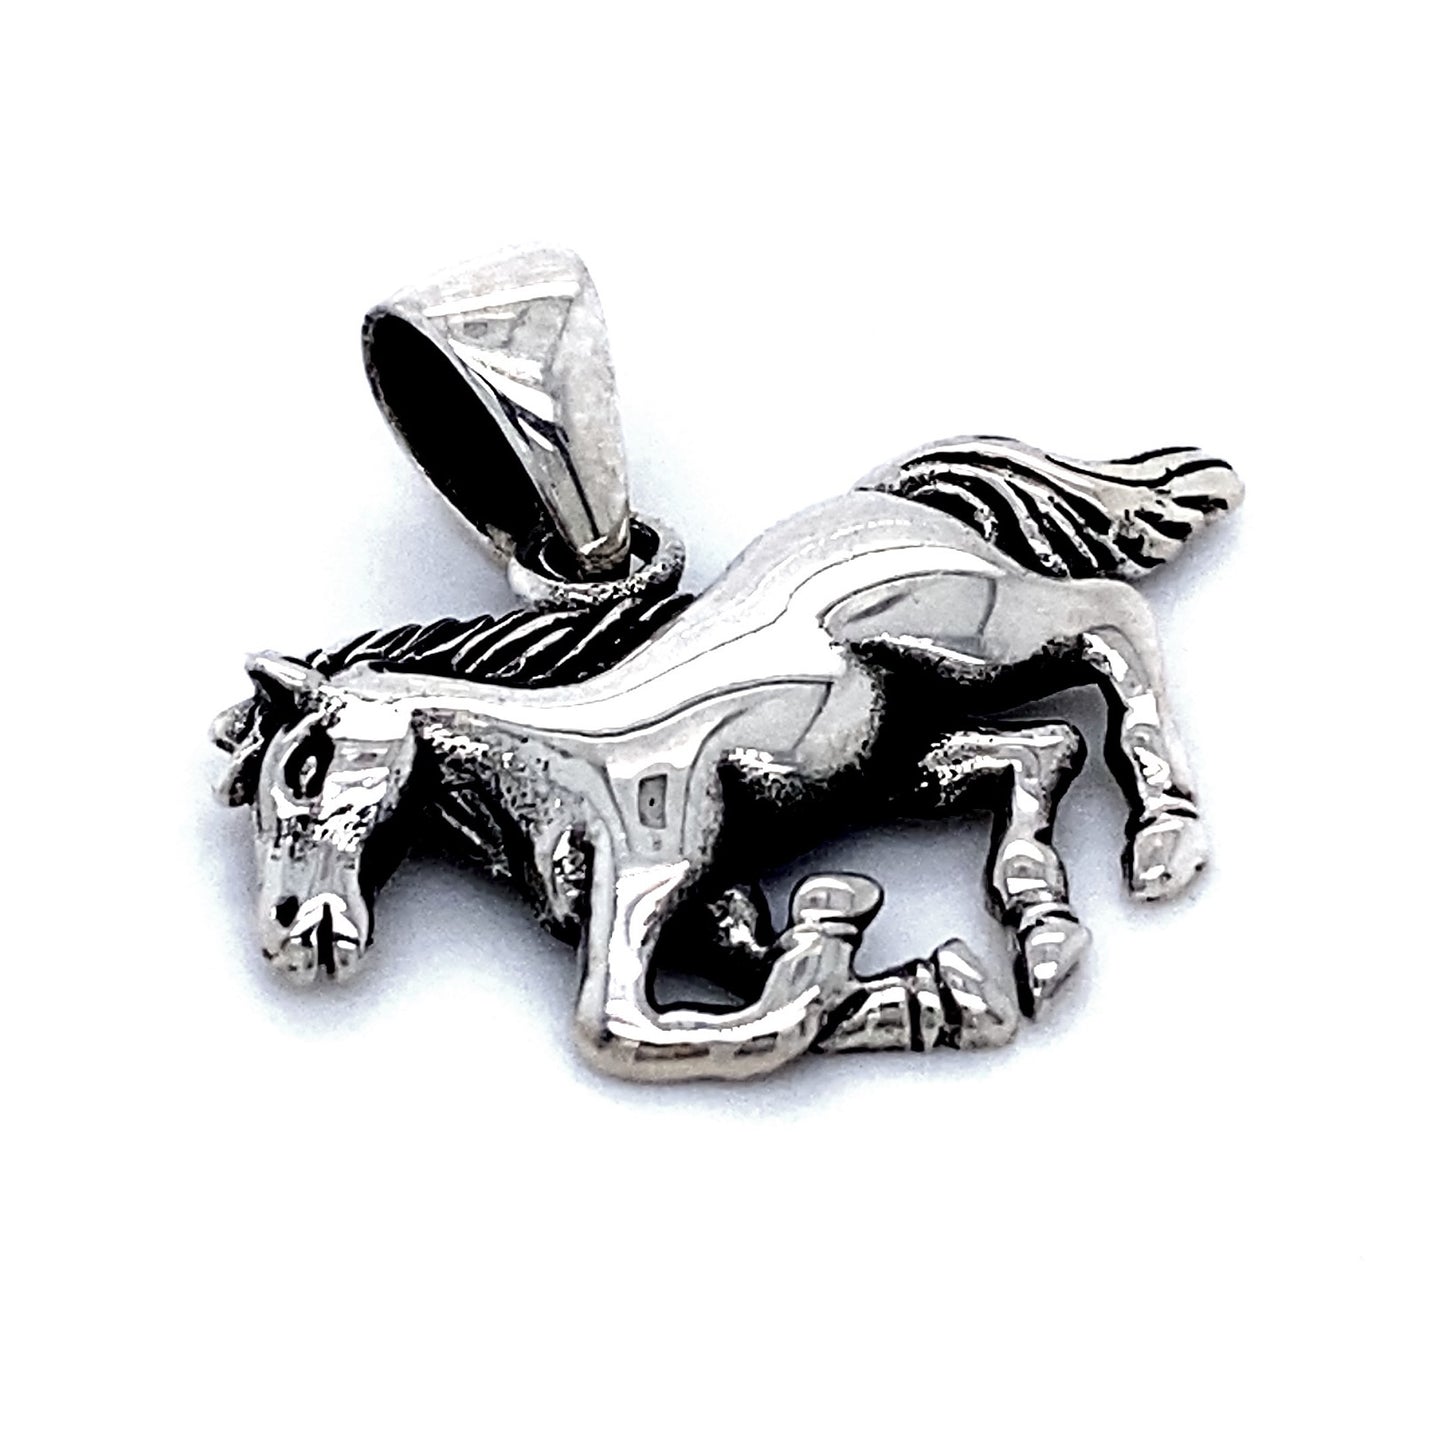 A stunning Galloping Horse Charm, masterfully crafted in the shape of a galloping horse. This exquisite charm captures the grace and spirit of equine beauty, perfect for any jewelry collection.